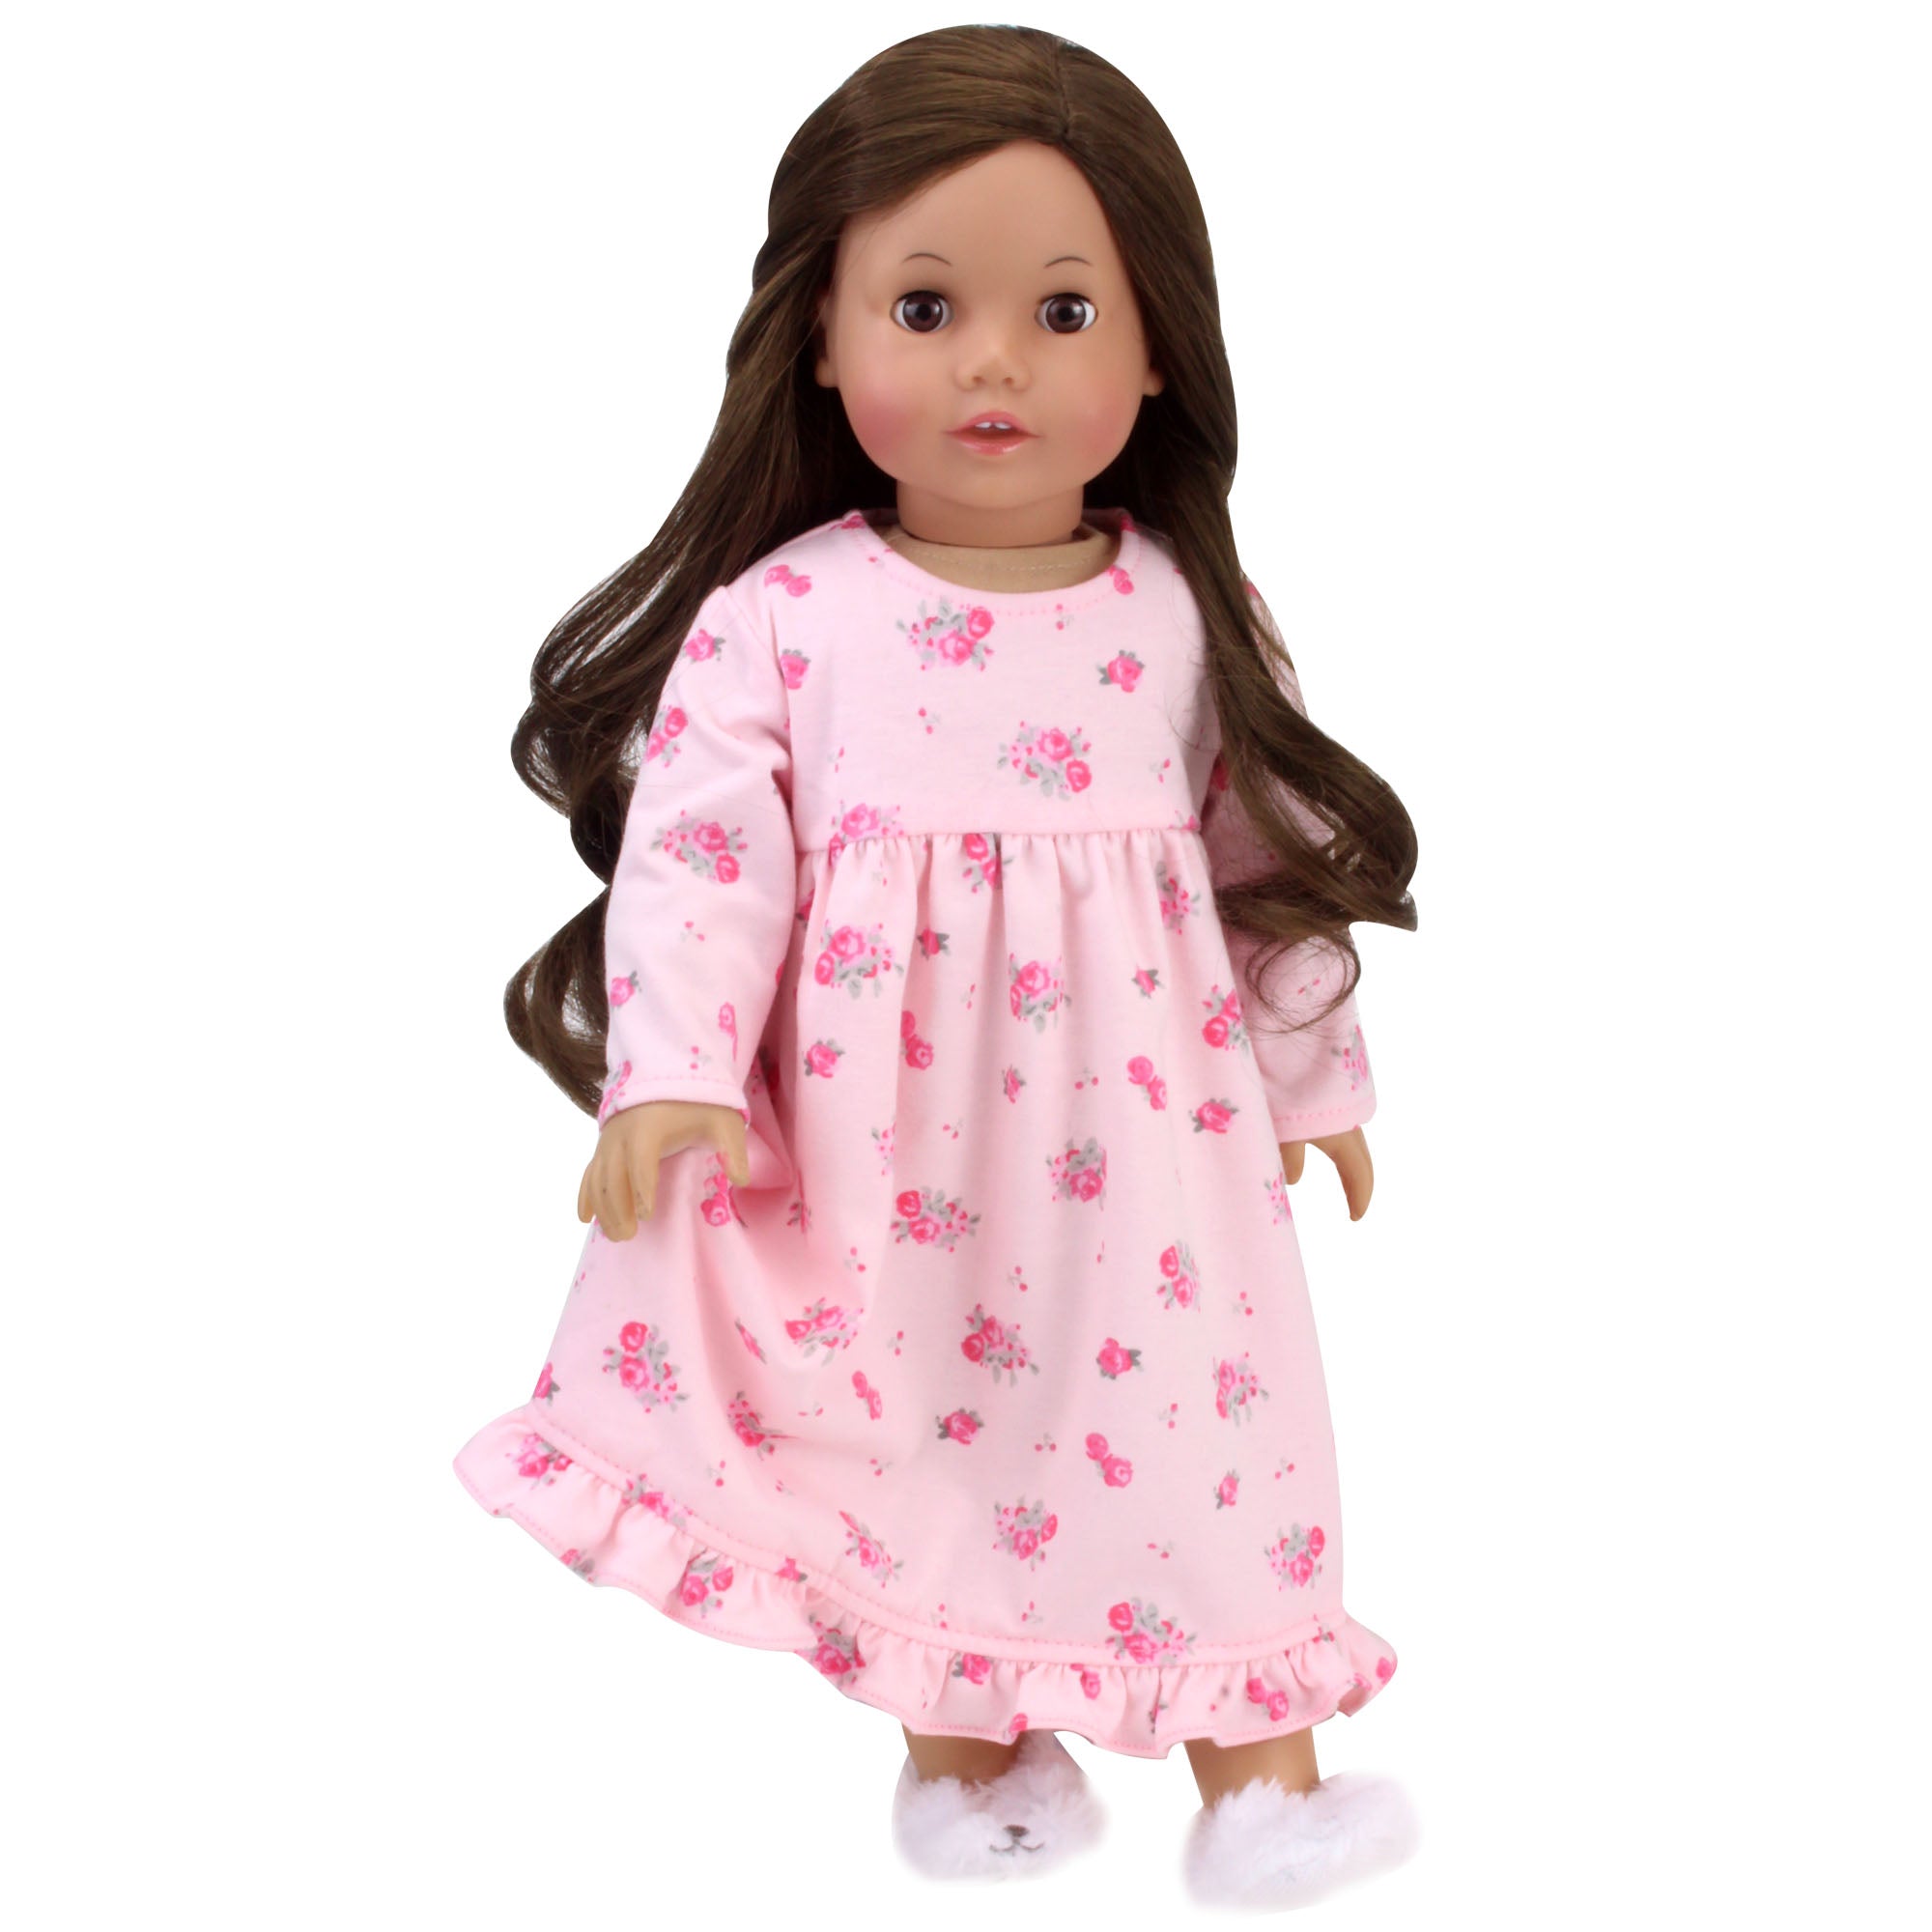 Sophia's Floral Print Nightgown for 18" Dolls, Pink